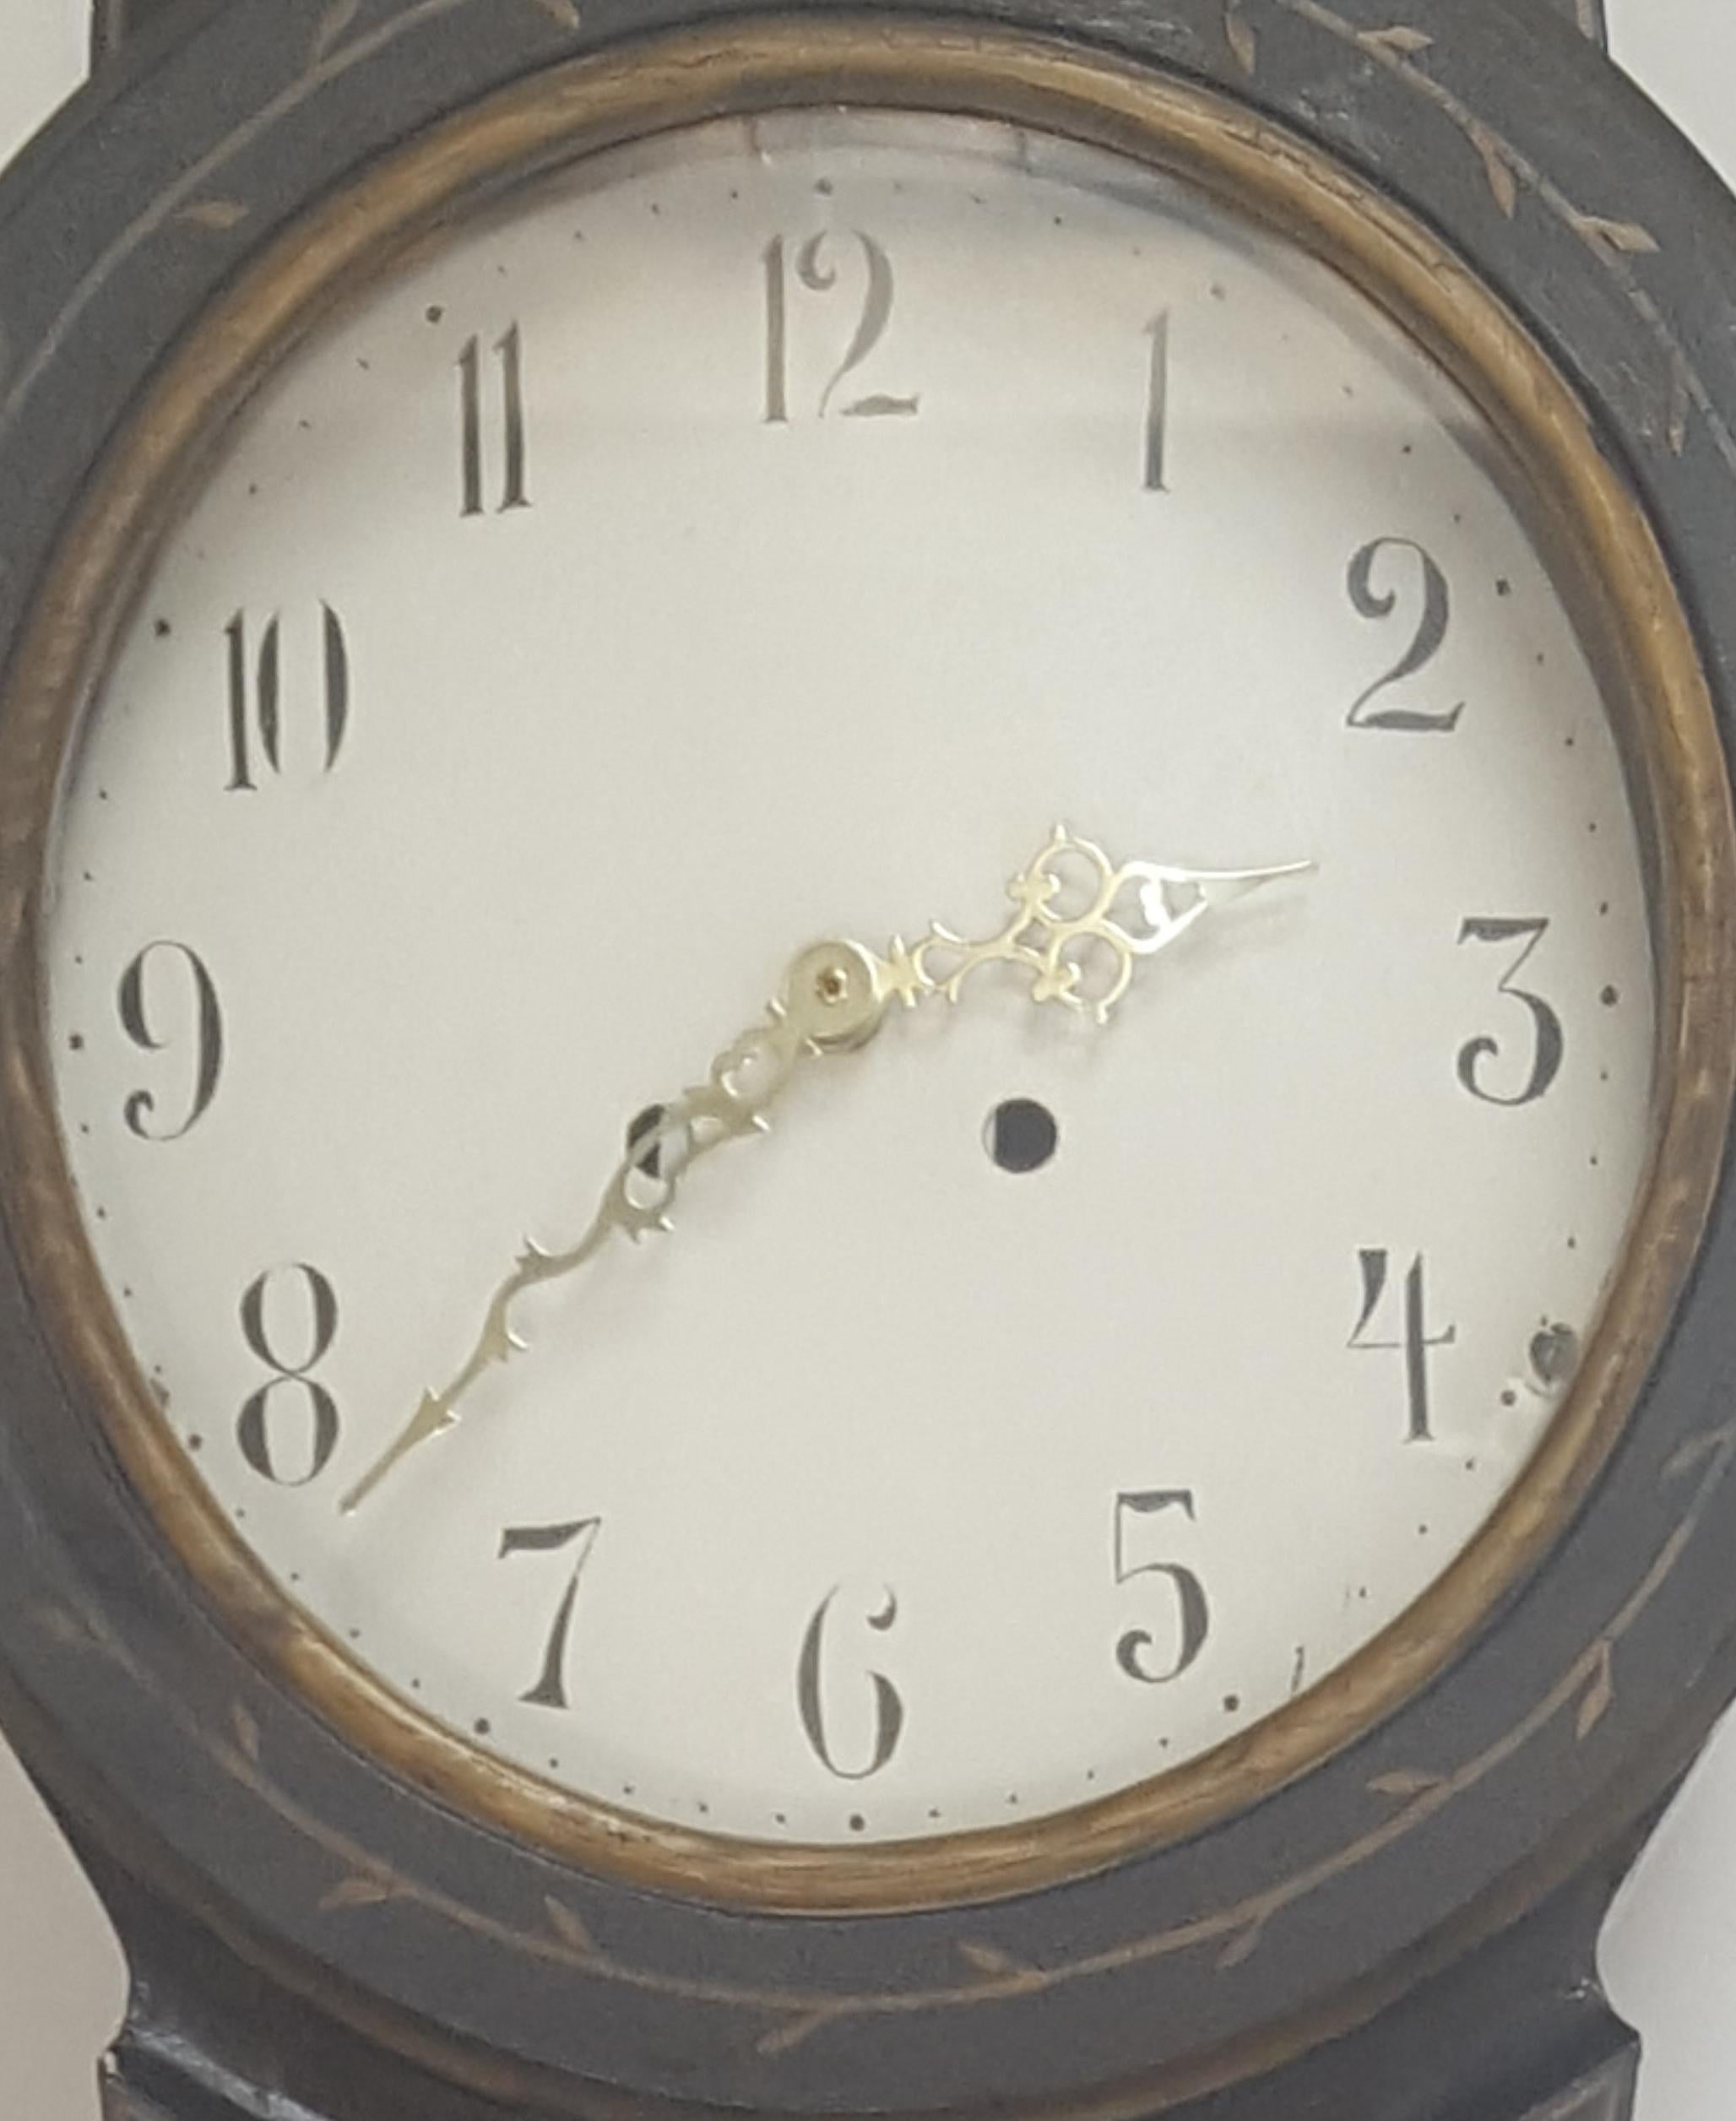 Antique Swedish mora clock from early 1800s in original black paint with hand painted gold designs and decorative face.

The clock body paint has the usual distressing/cracking and wood movement found in clocks of this age. 

We will fit a